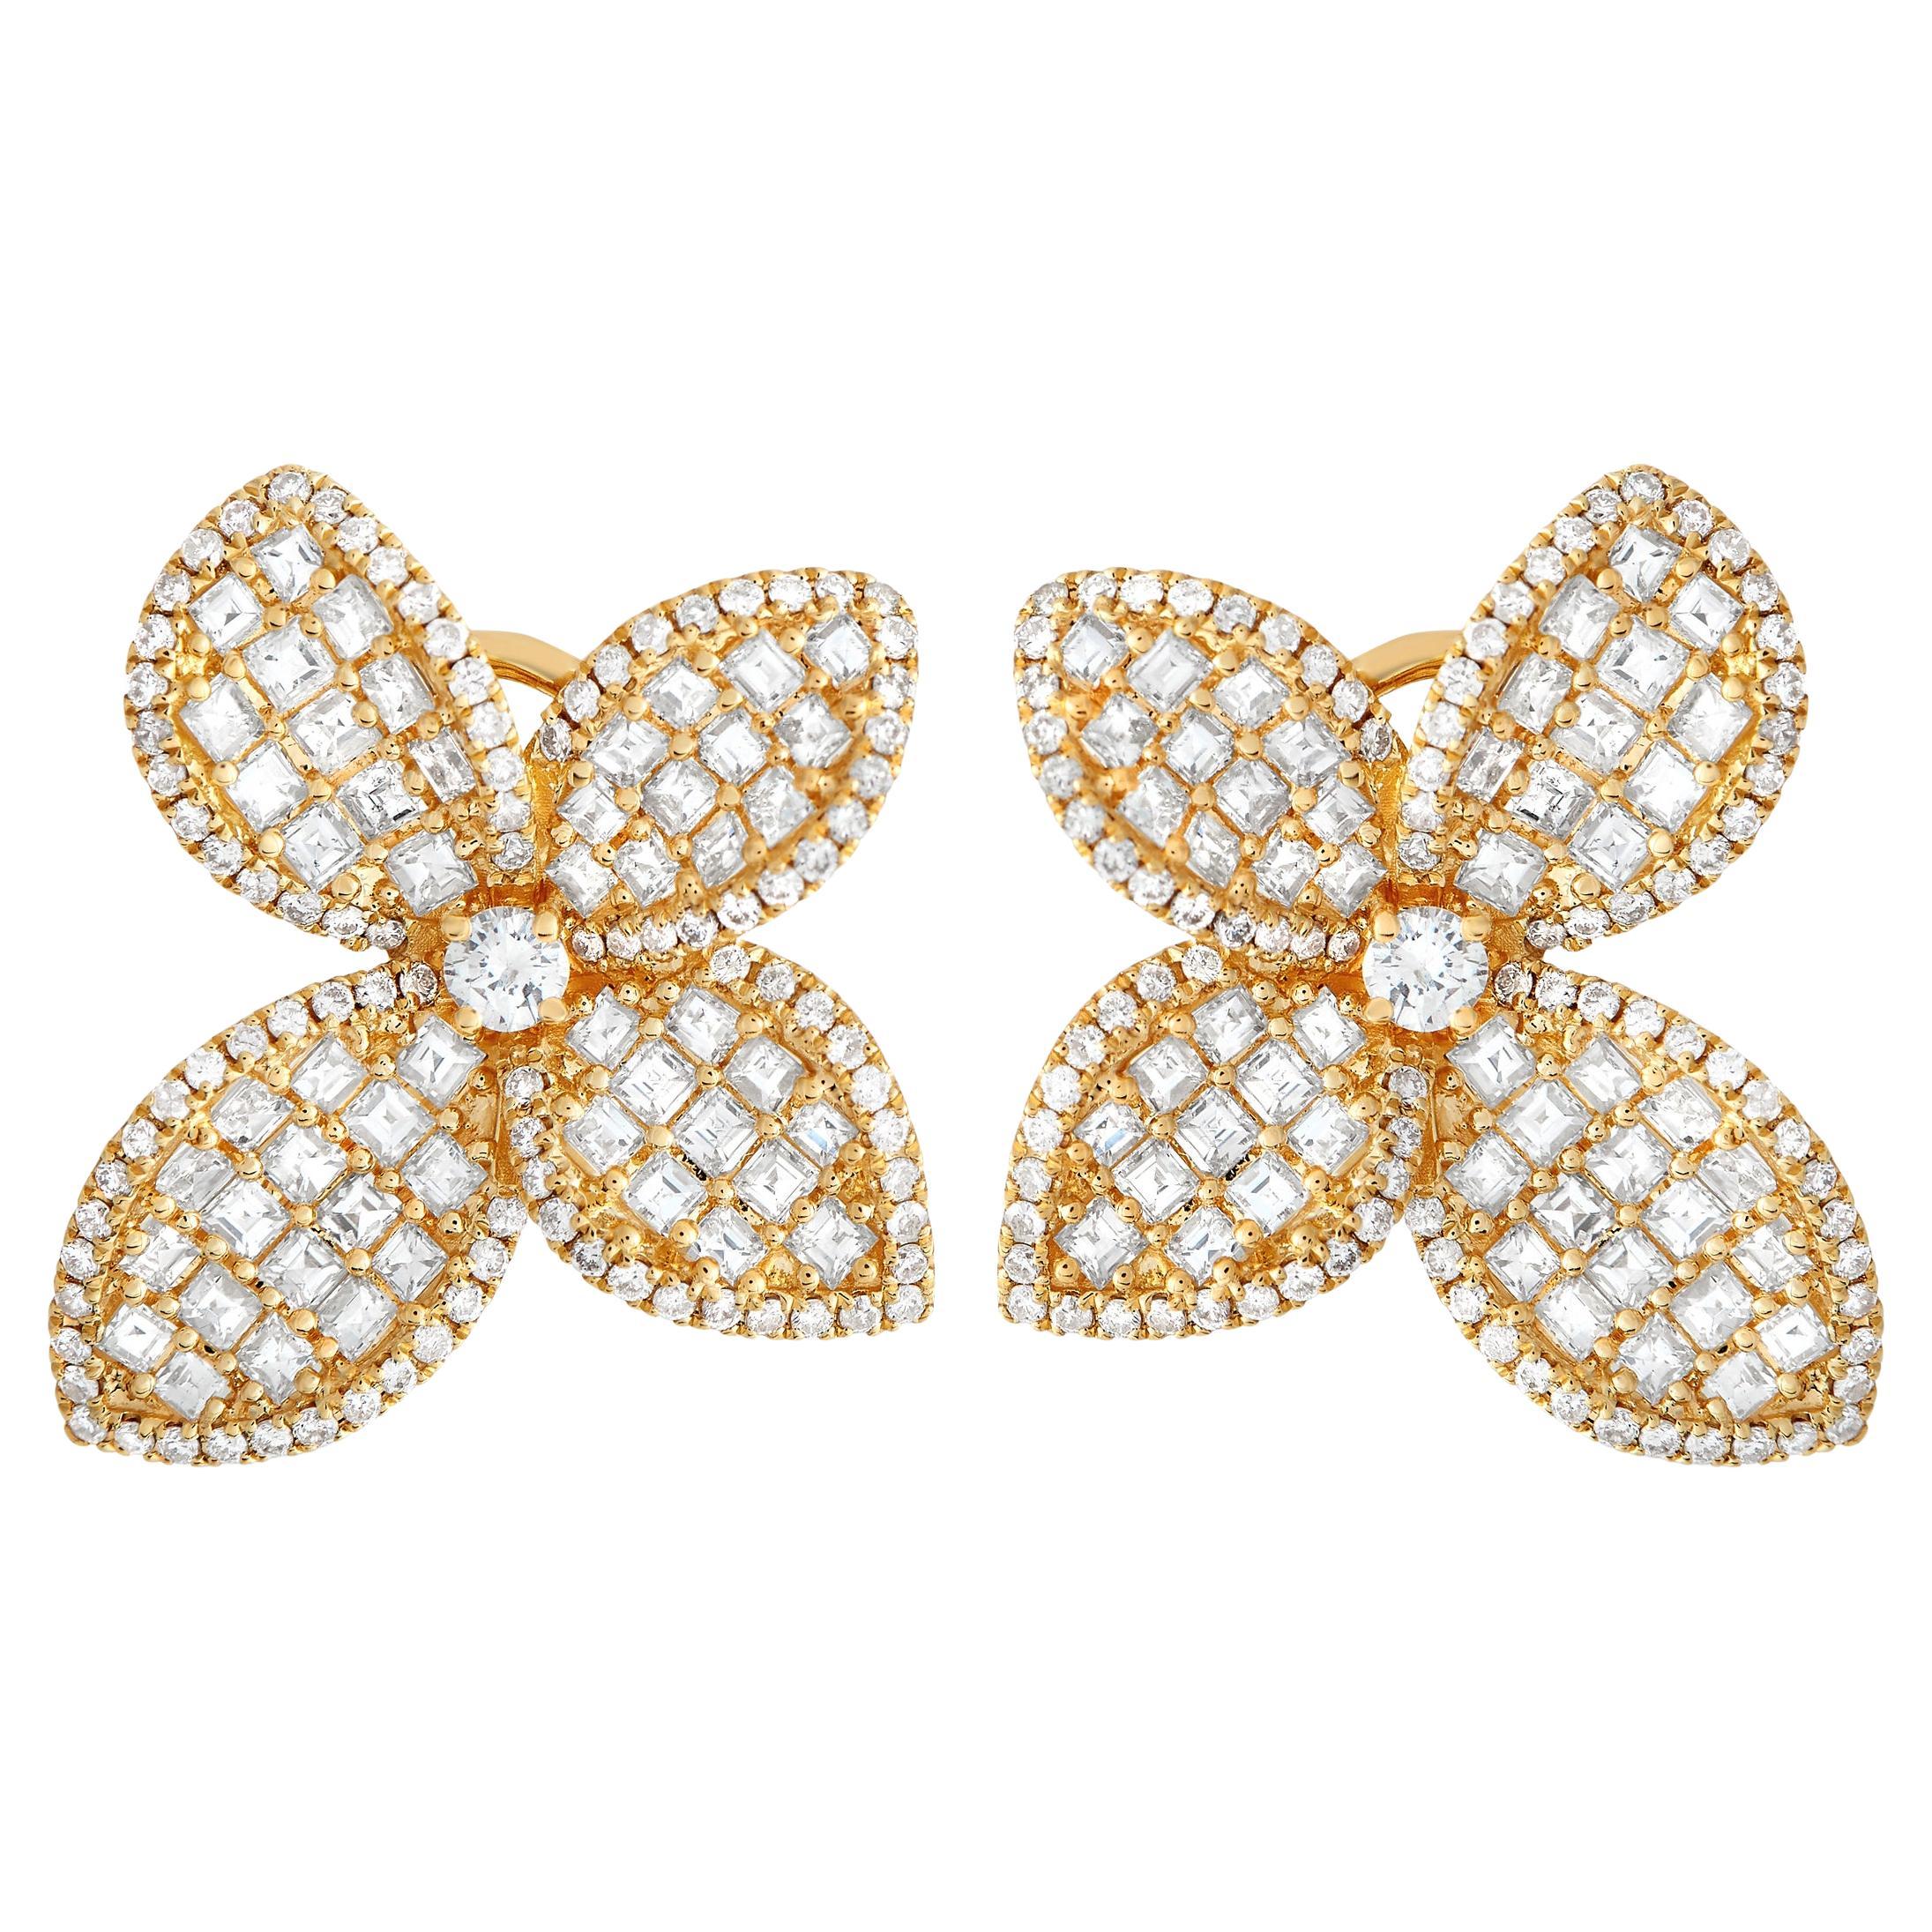 LB Exclusive 18K Yellow Gold 4.01ct Diamond Flower Earrings For Sale